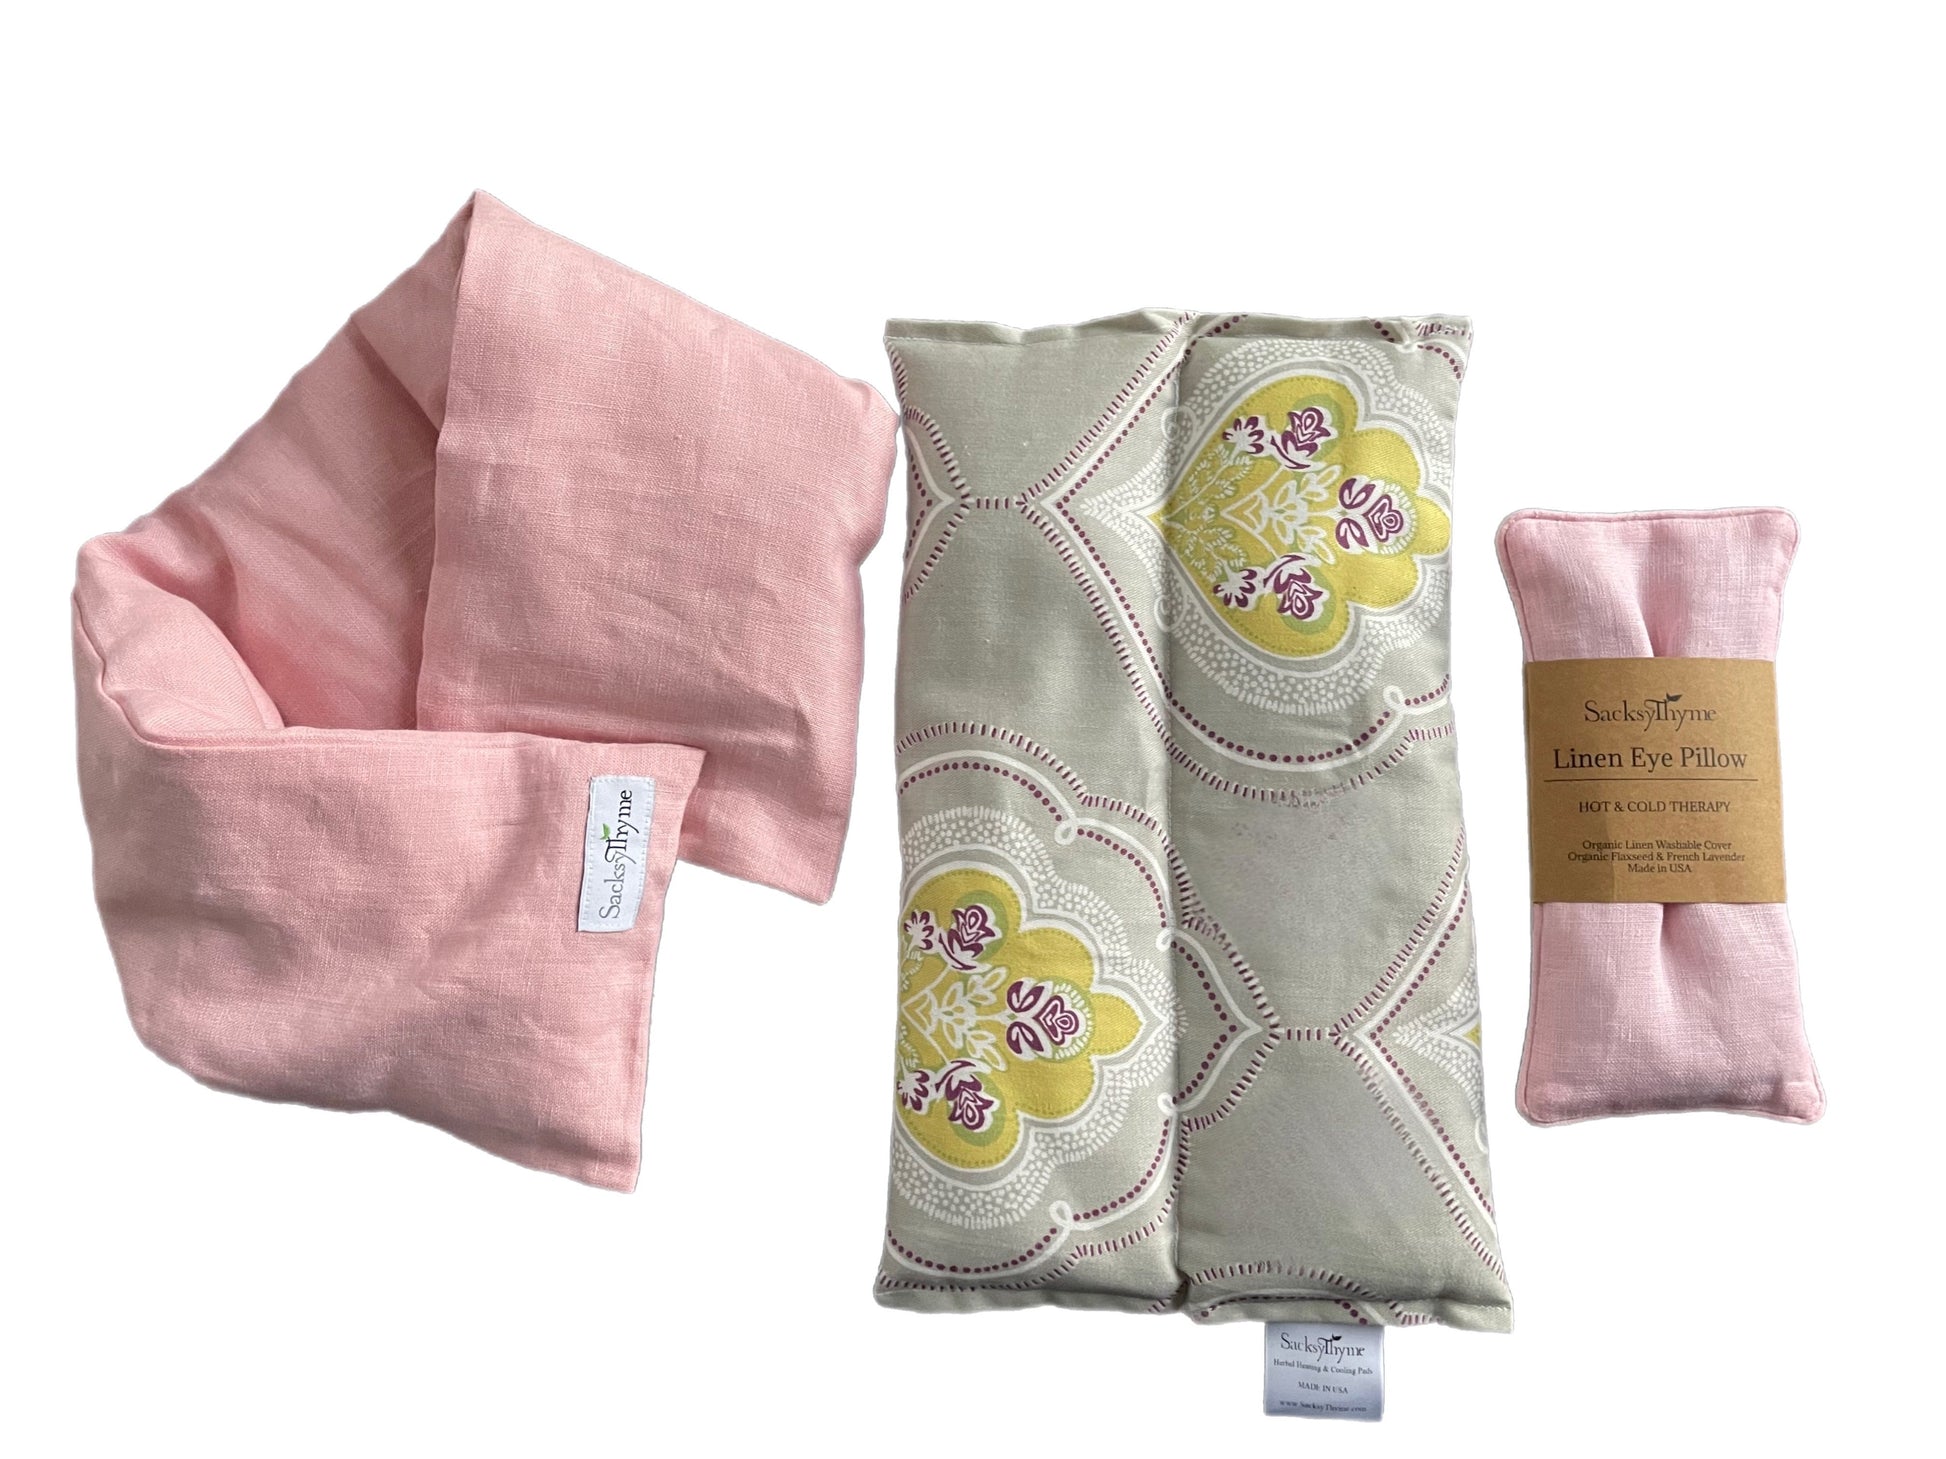 Sacksy Thyme Birthday Gift Set - 3 Piece - Lavender Heat Pad, Linen Neck Wrap & Linen Eye Pillow - Luxury Birthday Gift Set for Women - Unique Women's Gift Basket - Card for Personalized Message